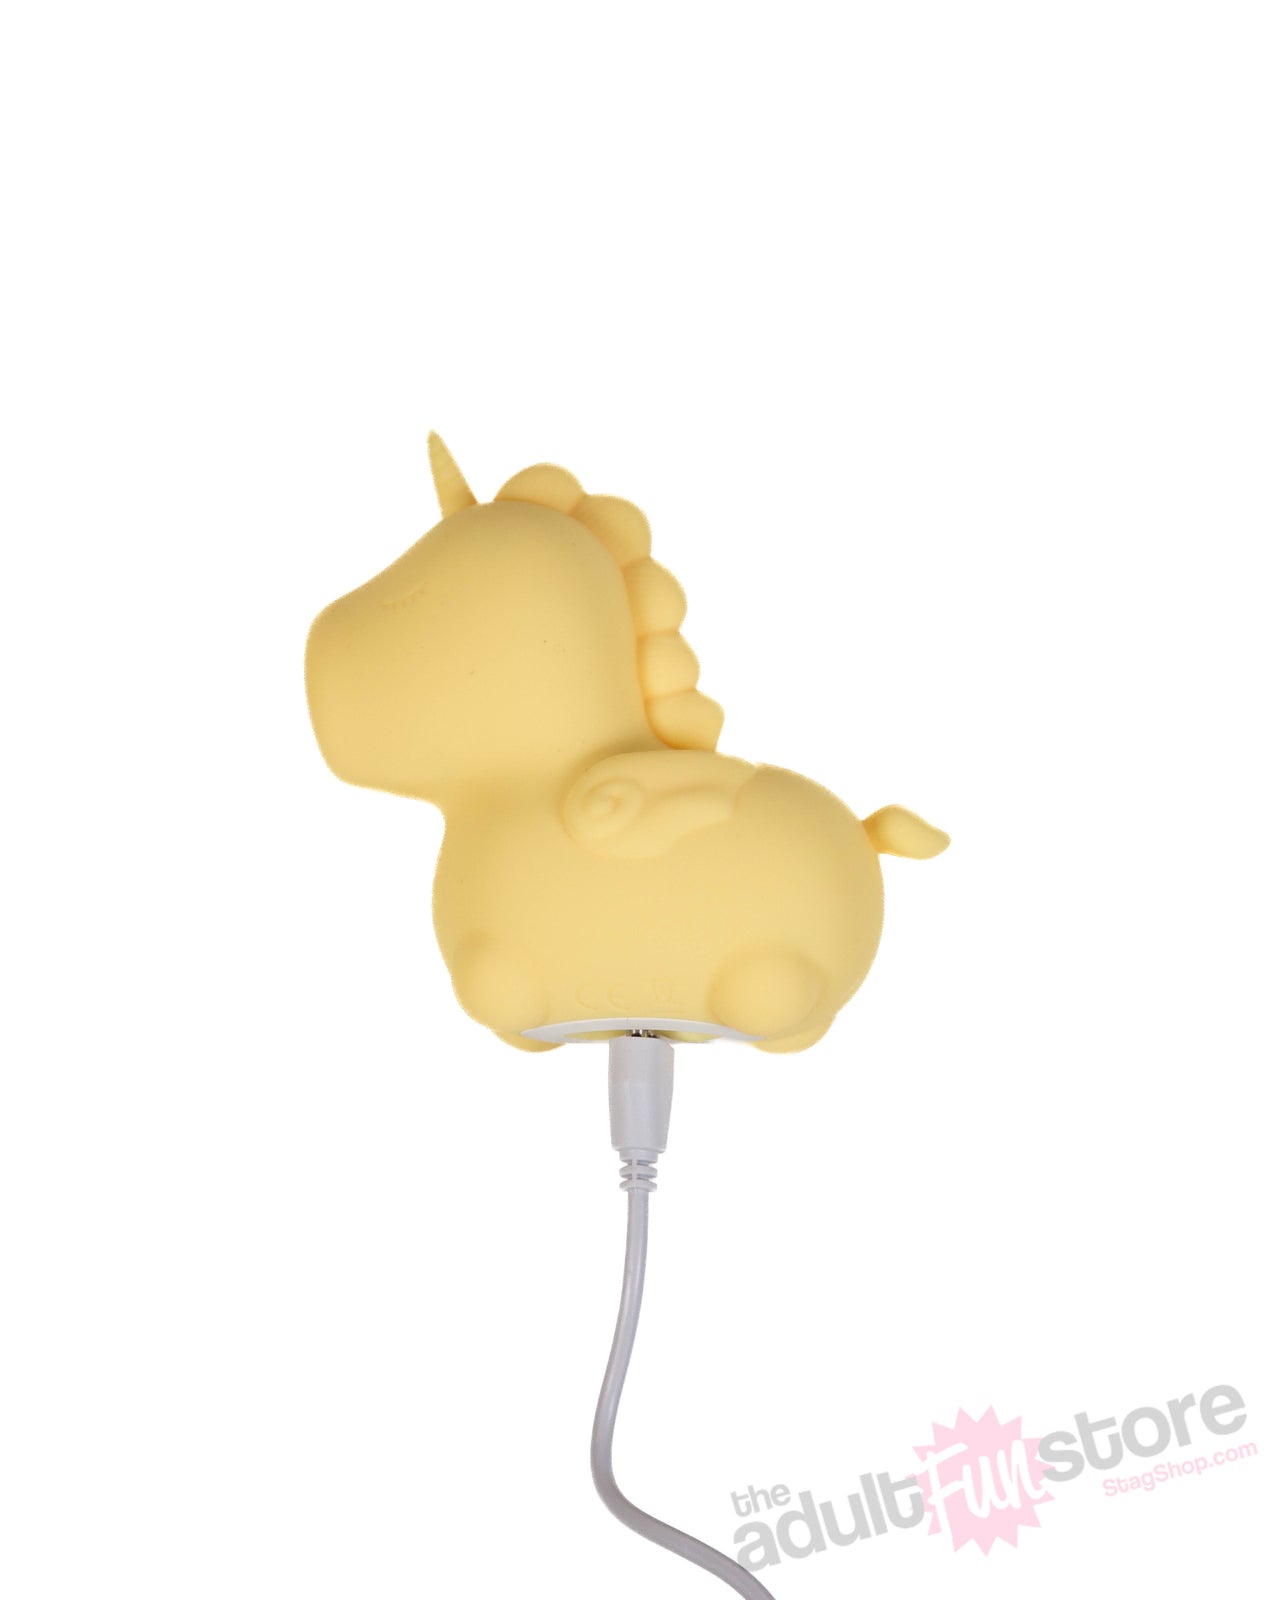 Creative Conceptions - Unihorn Bean Blossom Fluttering Vibrator - Yellow - Stag Shop